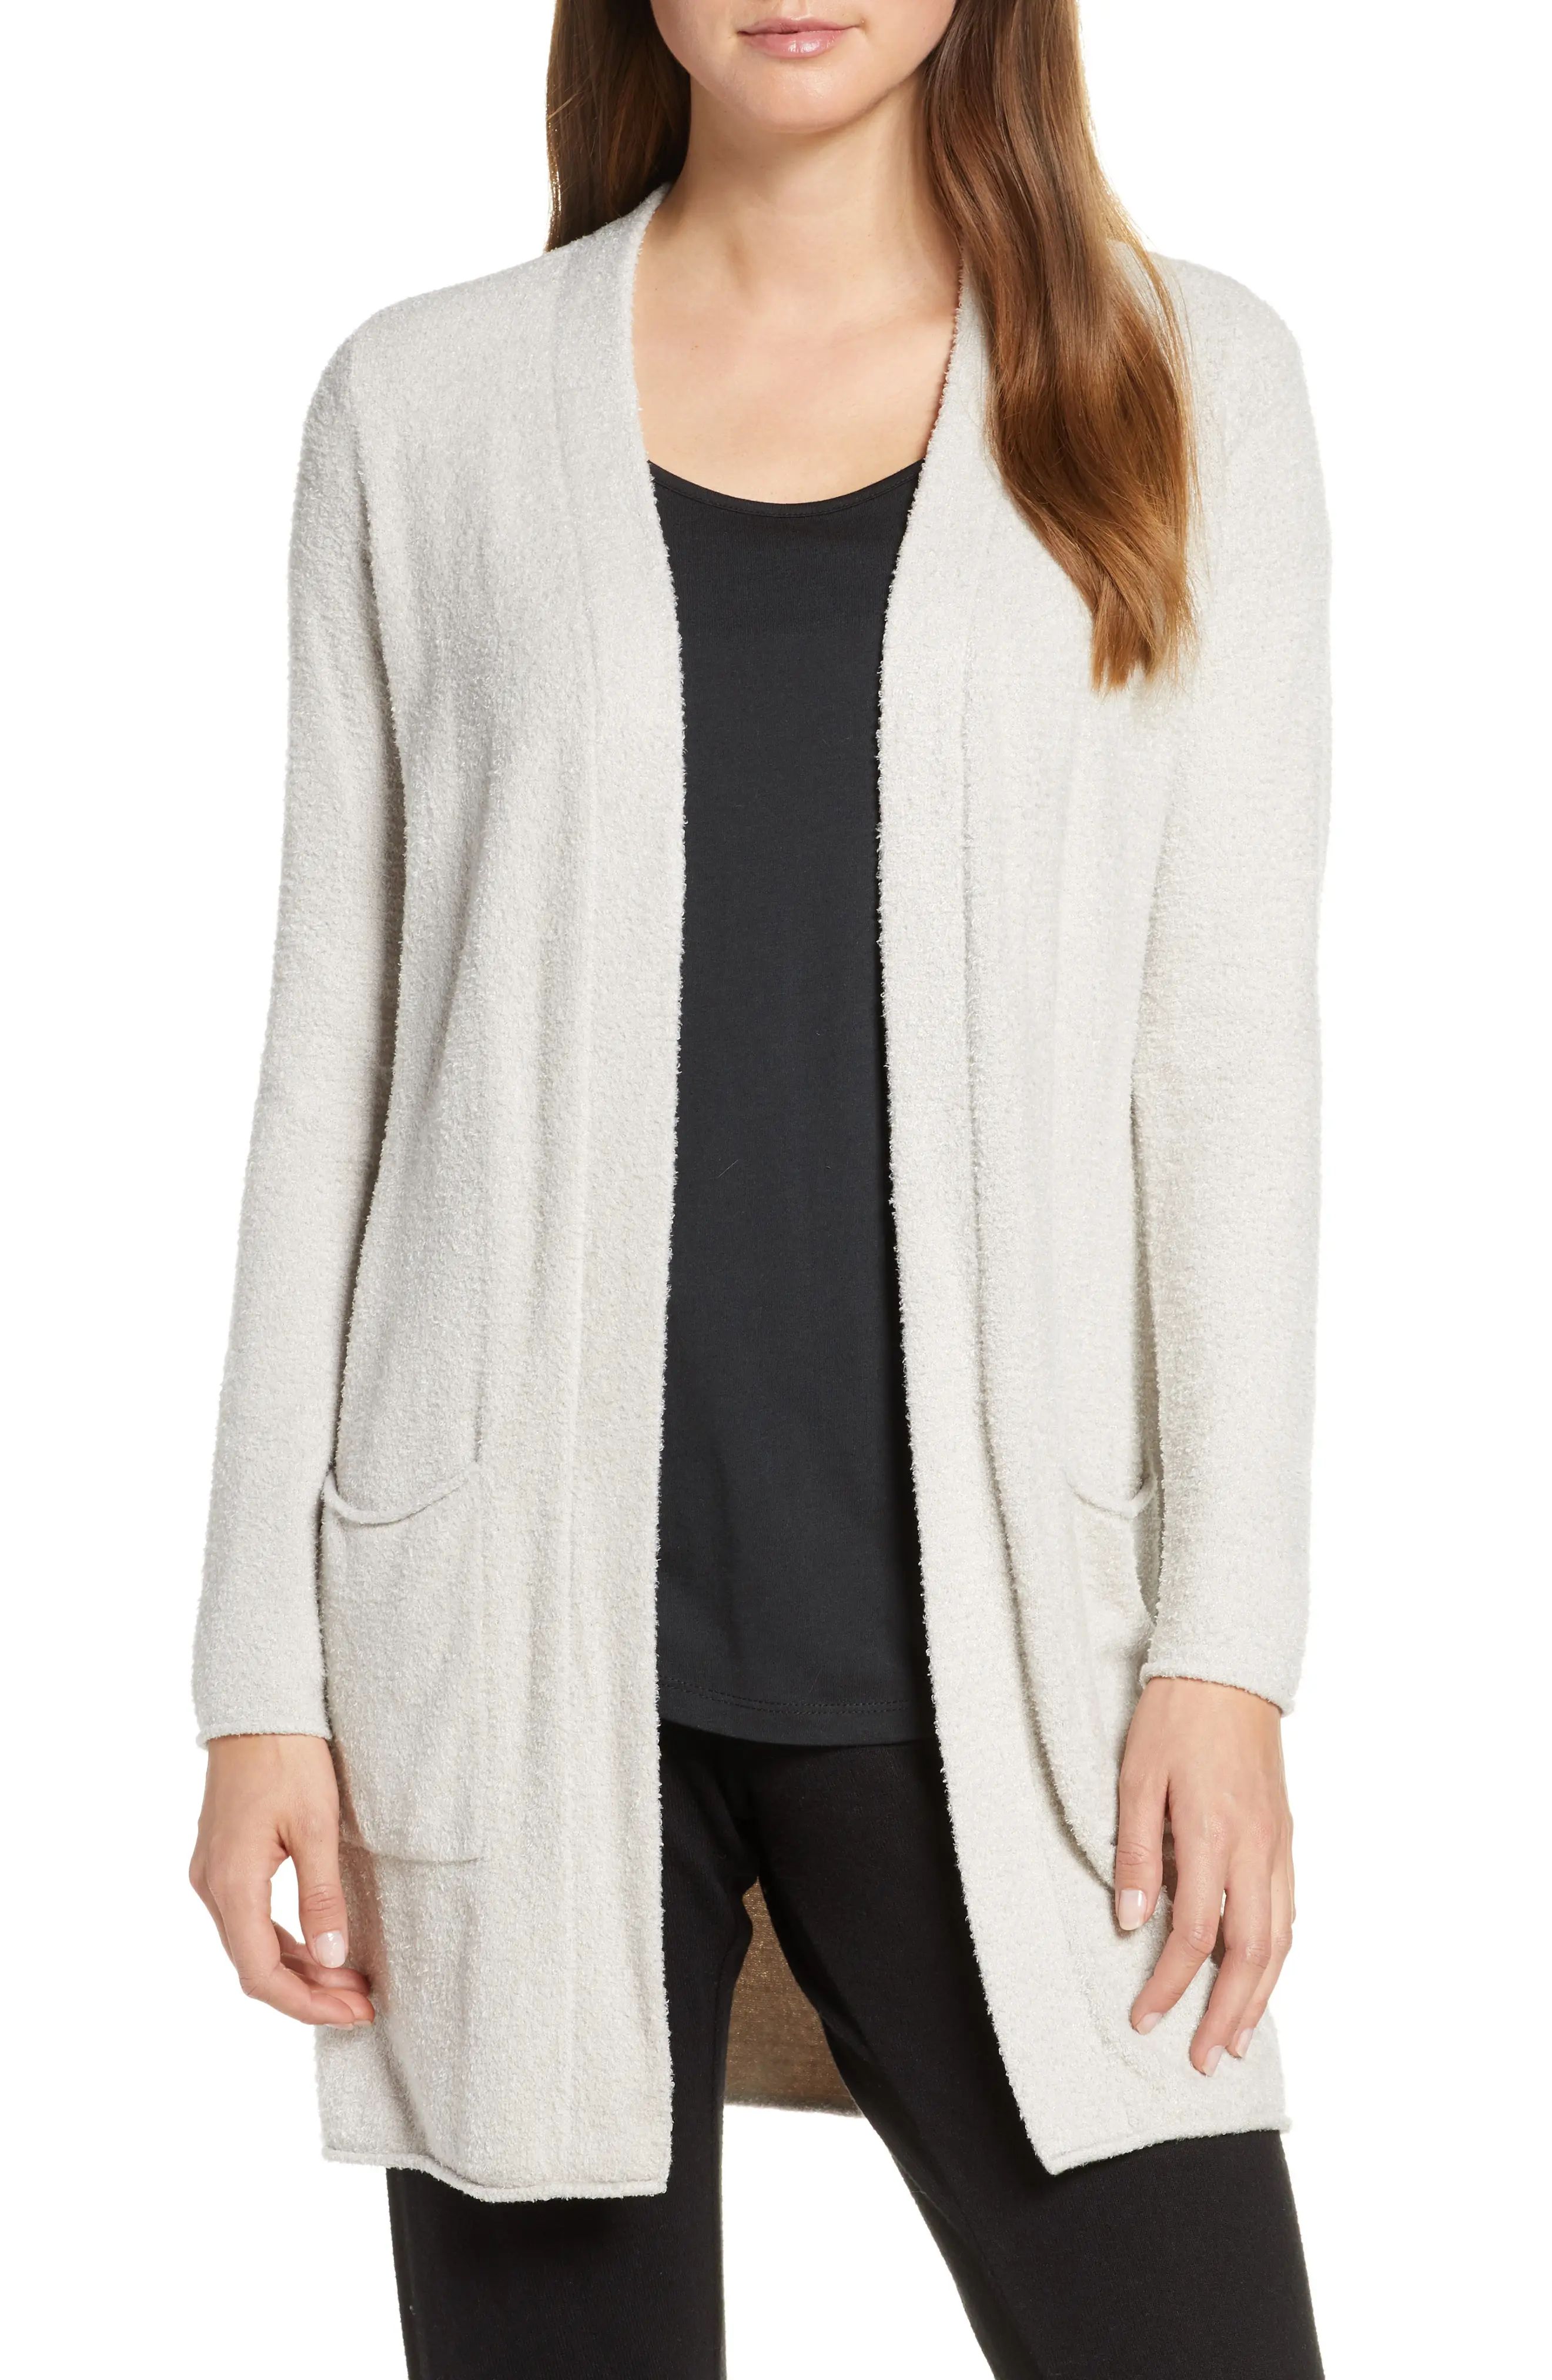 Barefoot Dreams(R) CozyChic Lite(R) Long Cardigan in Silver at Nordstrom, Size Large | Nordstrom